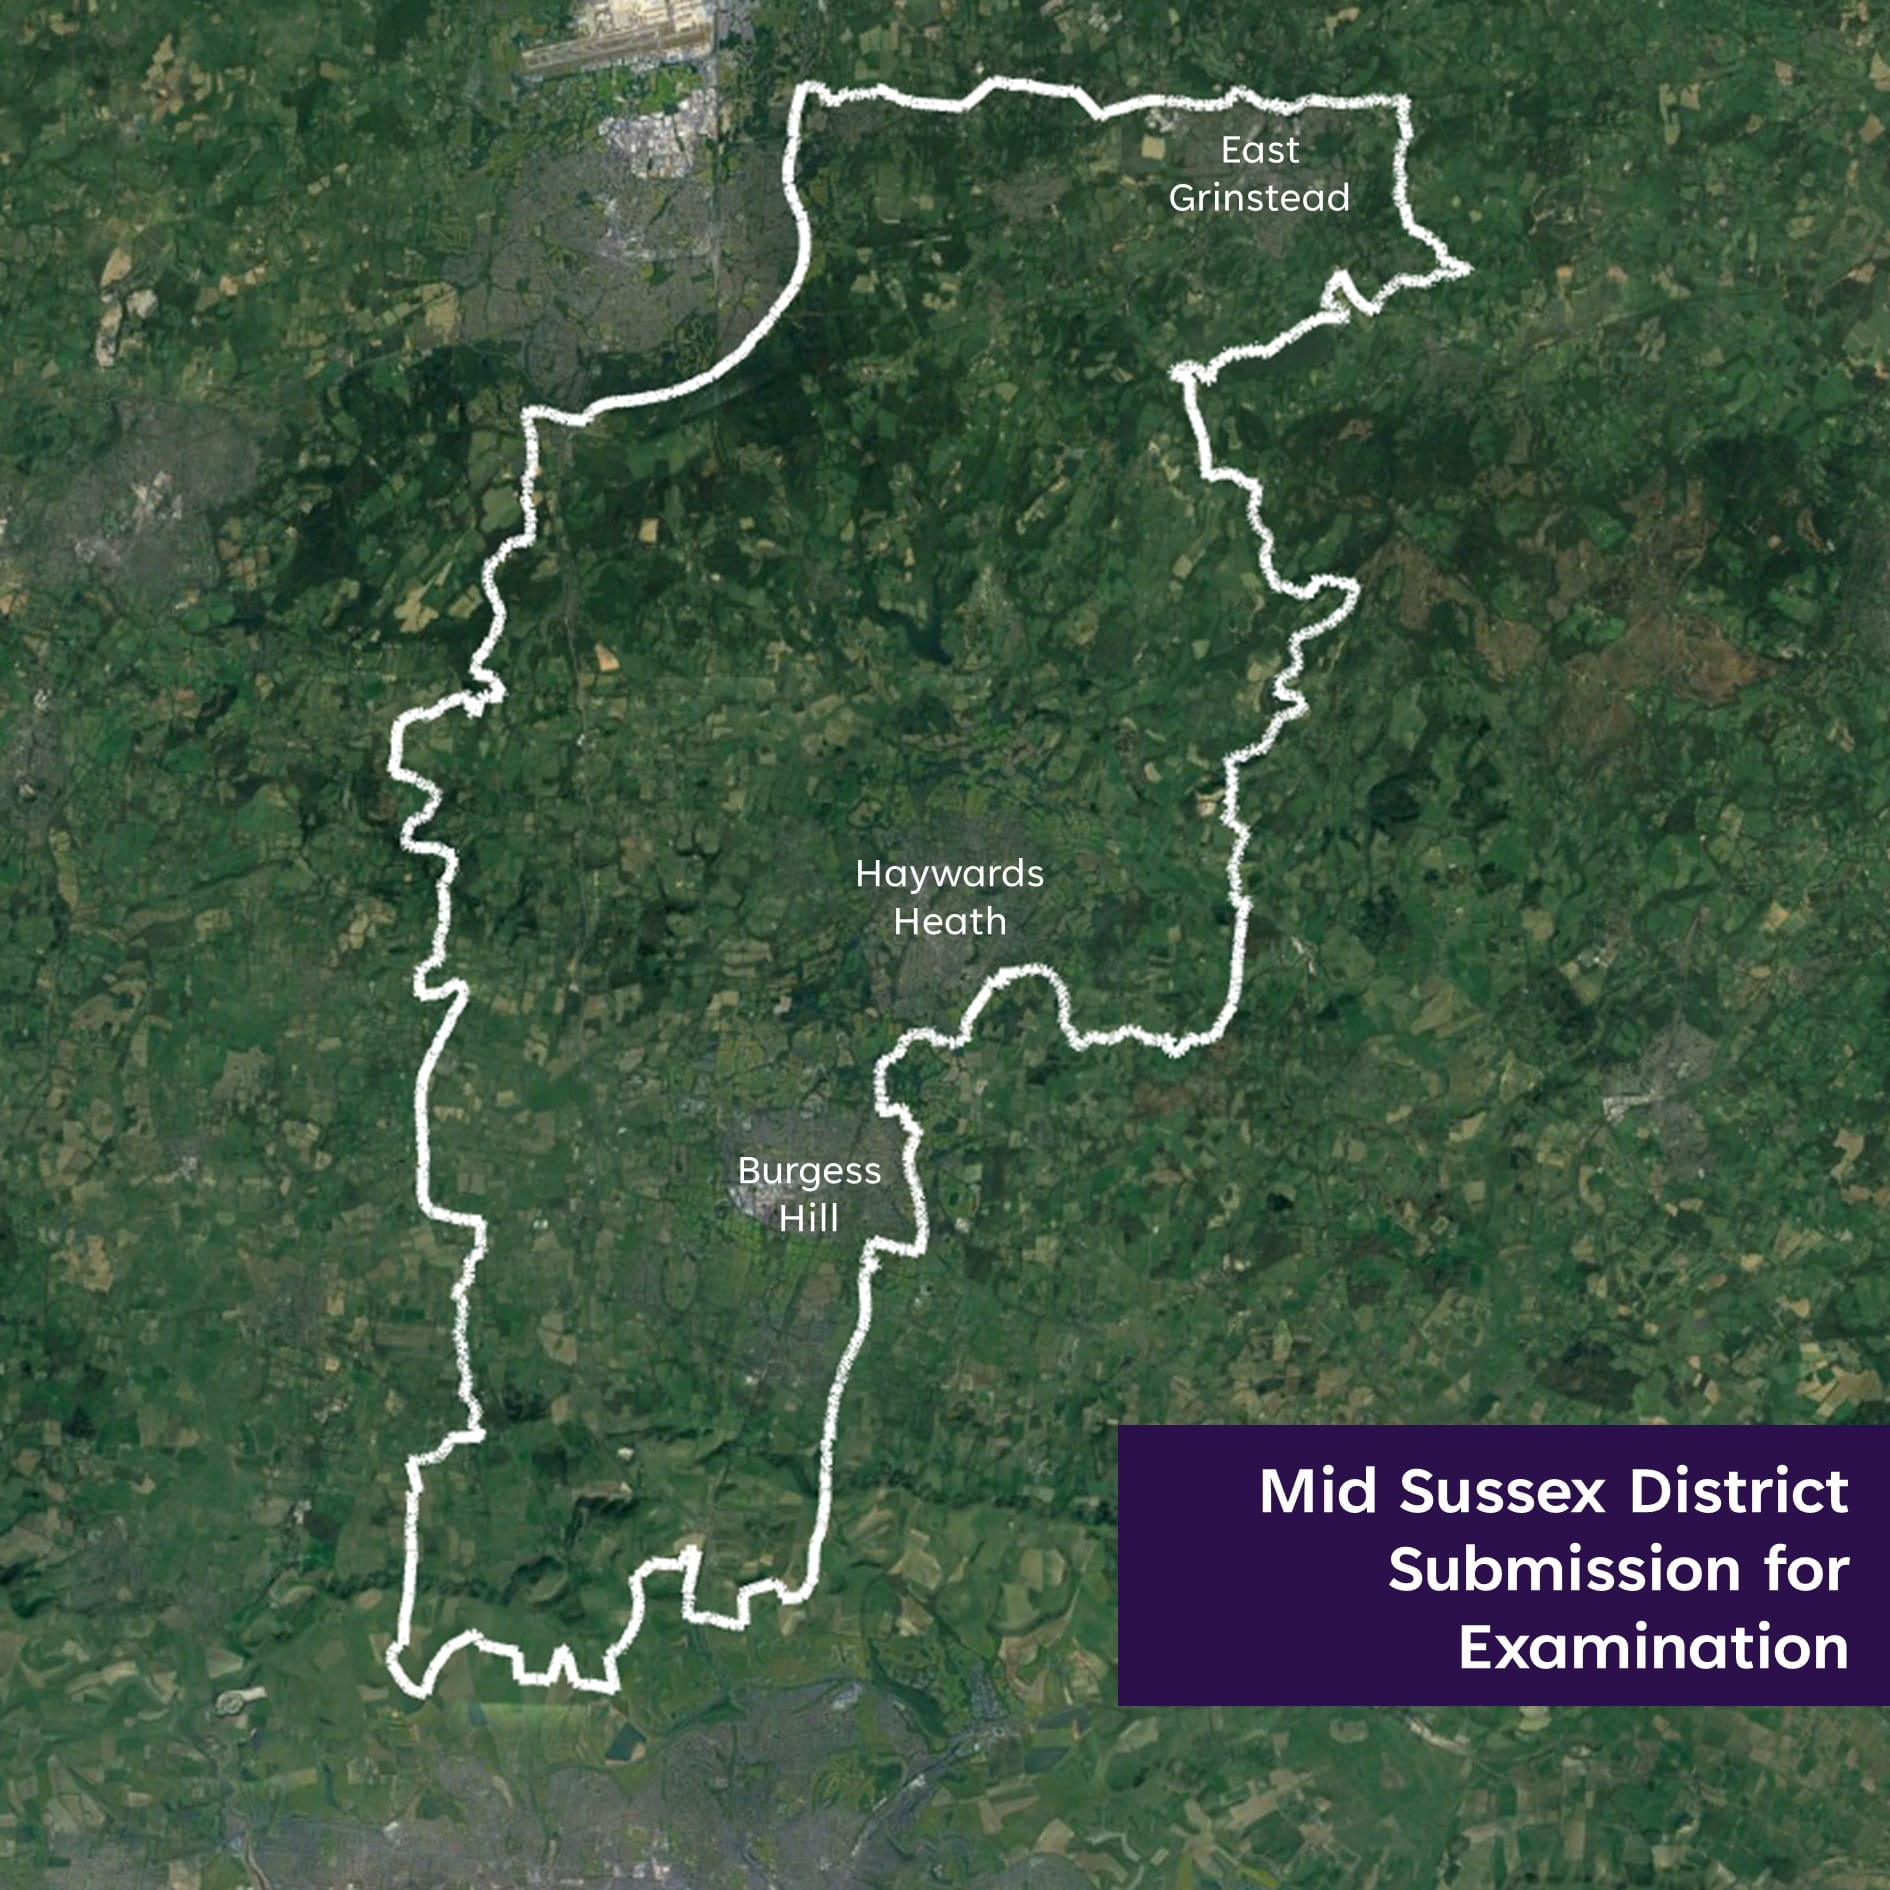 Map outlining the Mid Sussex District Submission for Examination